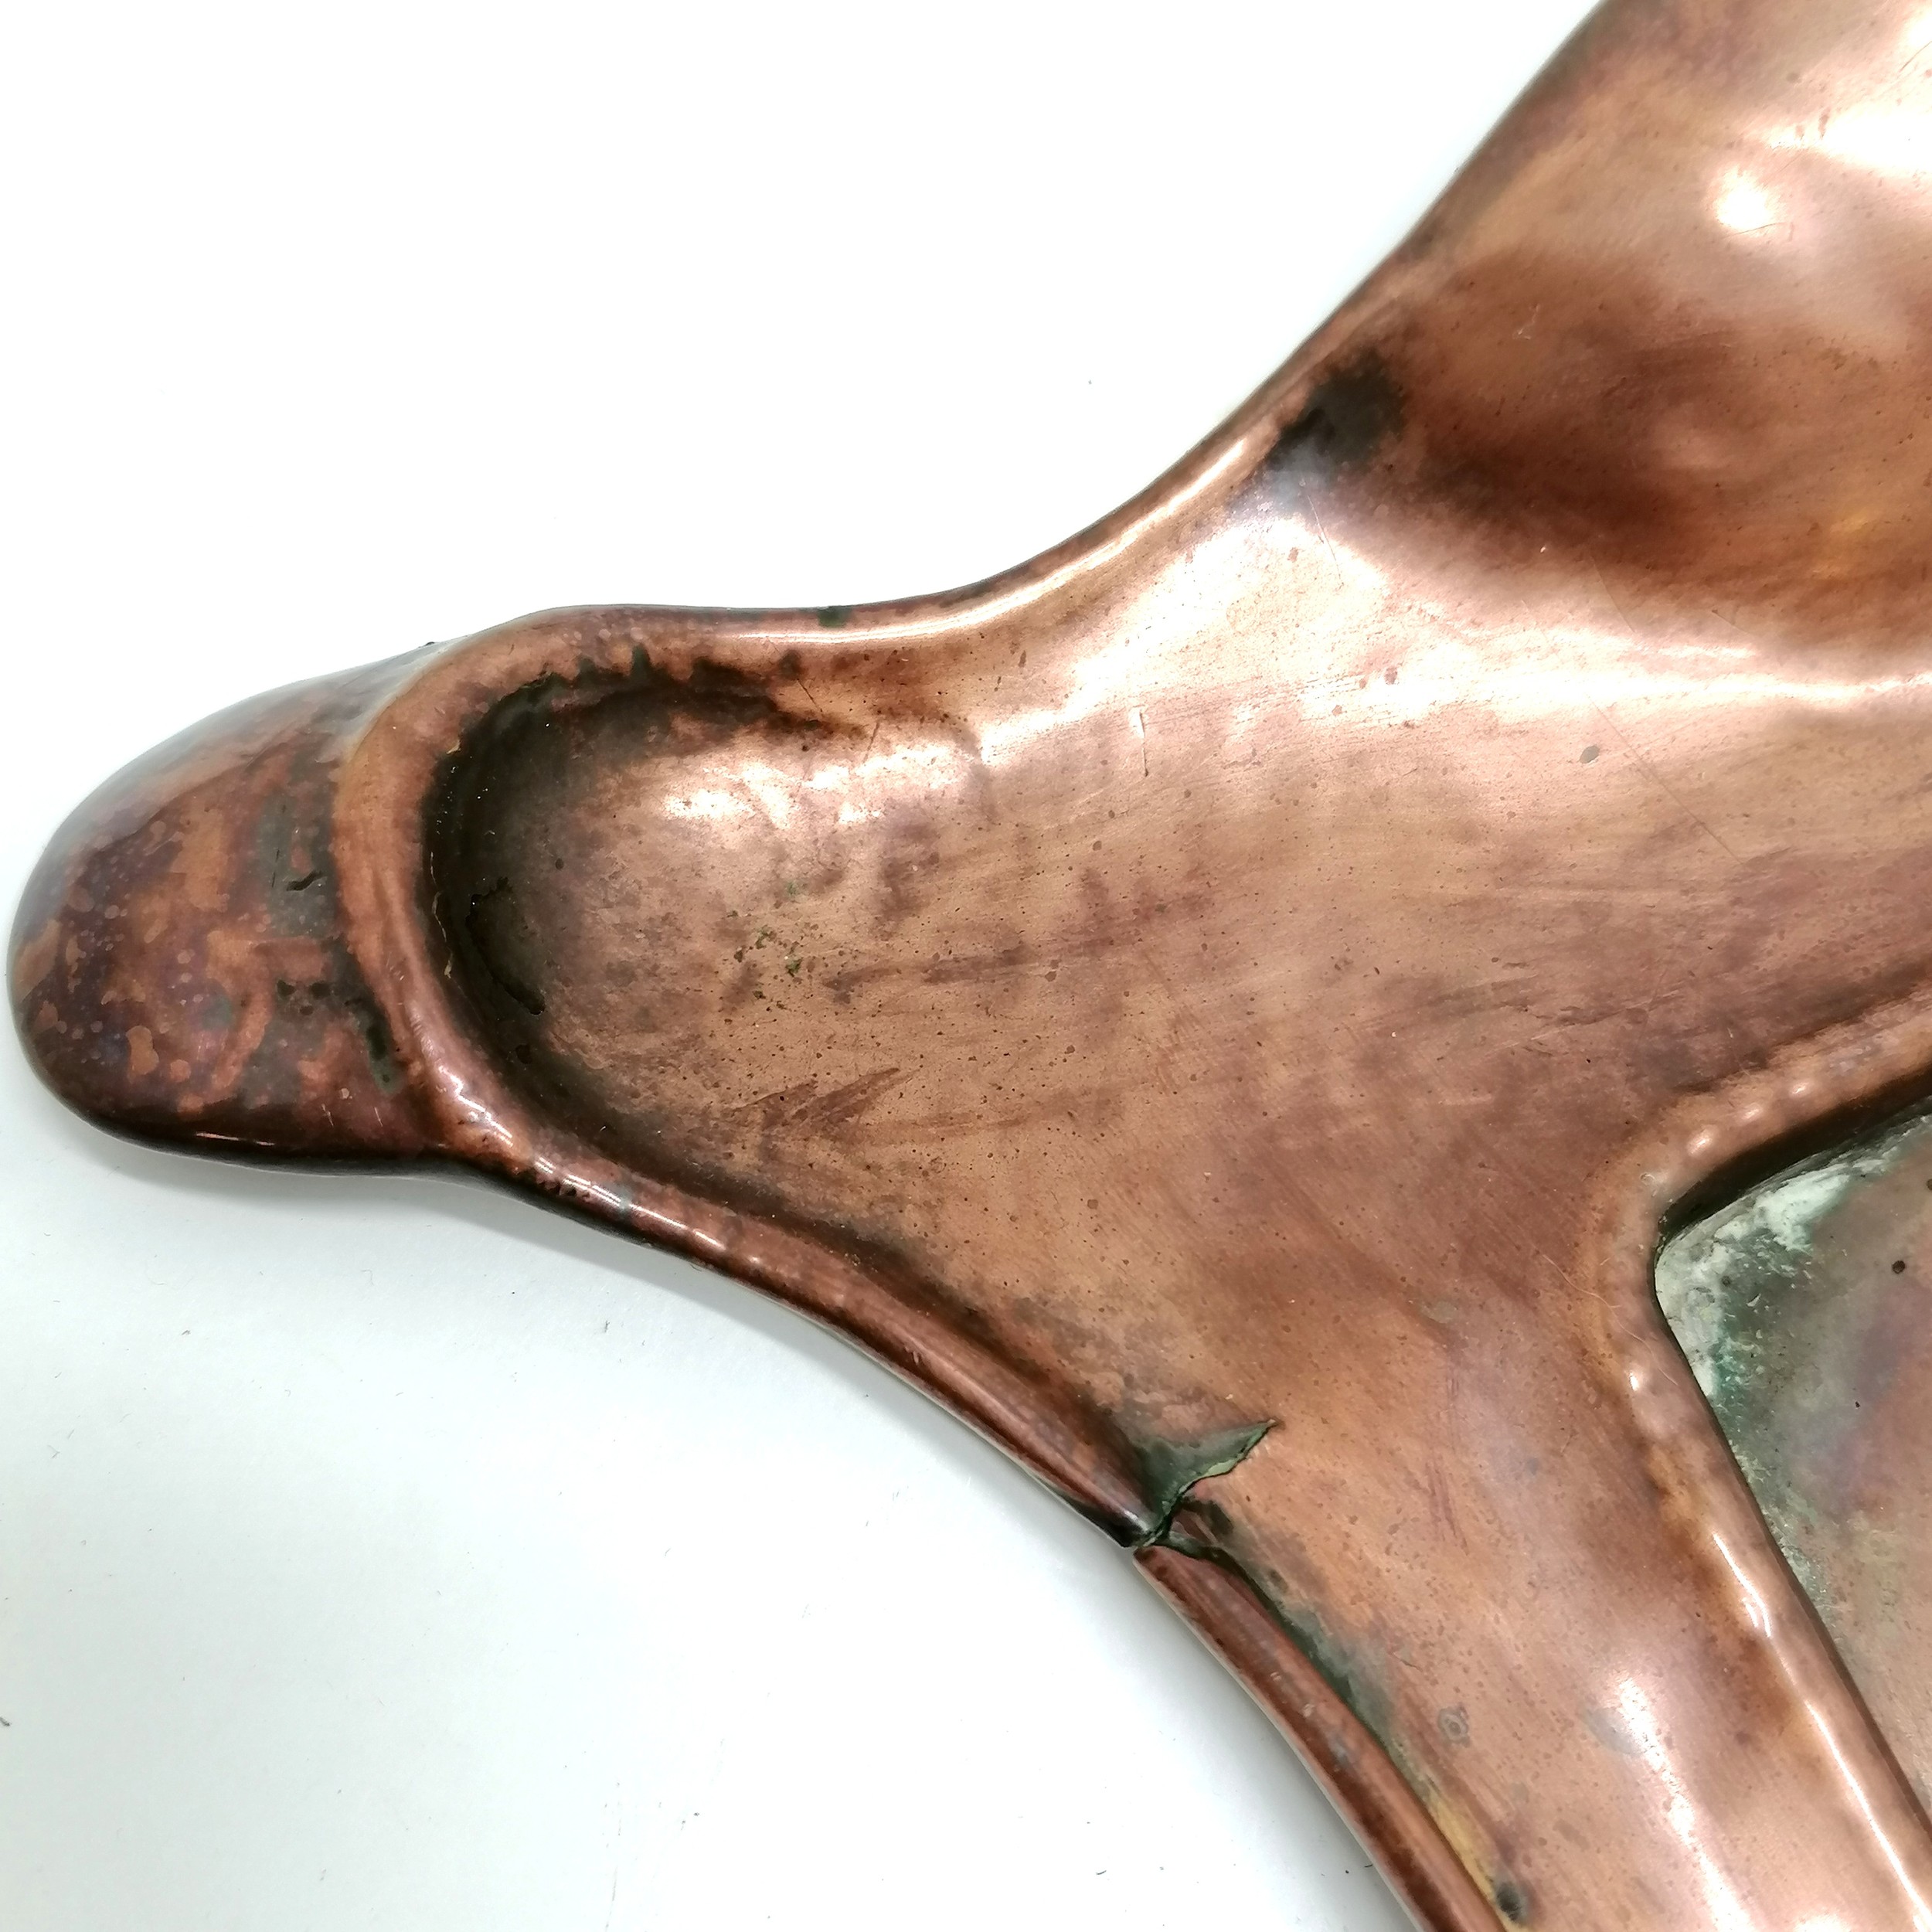 c.1905 Art Nouveau hammered copper serving tray by Norman & Ernest Spittle for Art Fittings Ltd as - Image 3 of 6